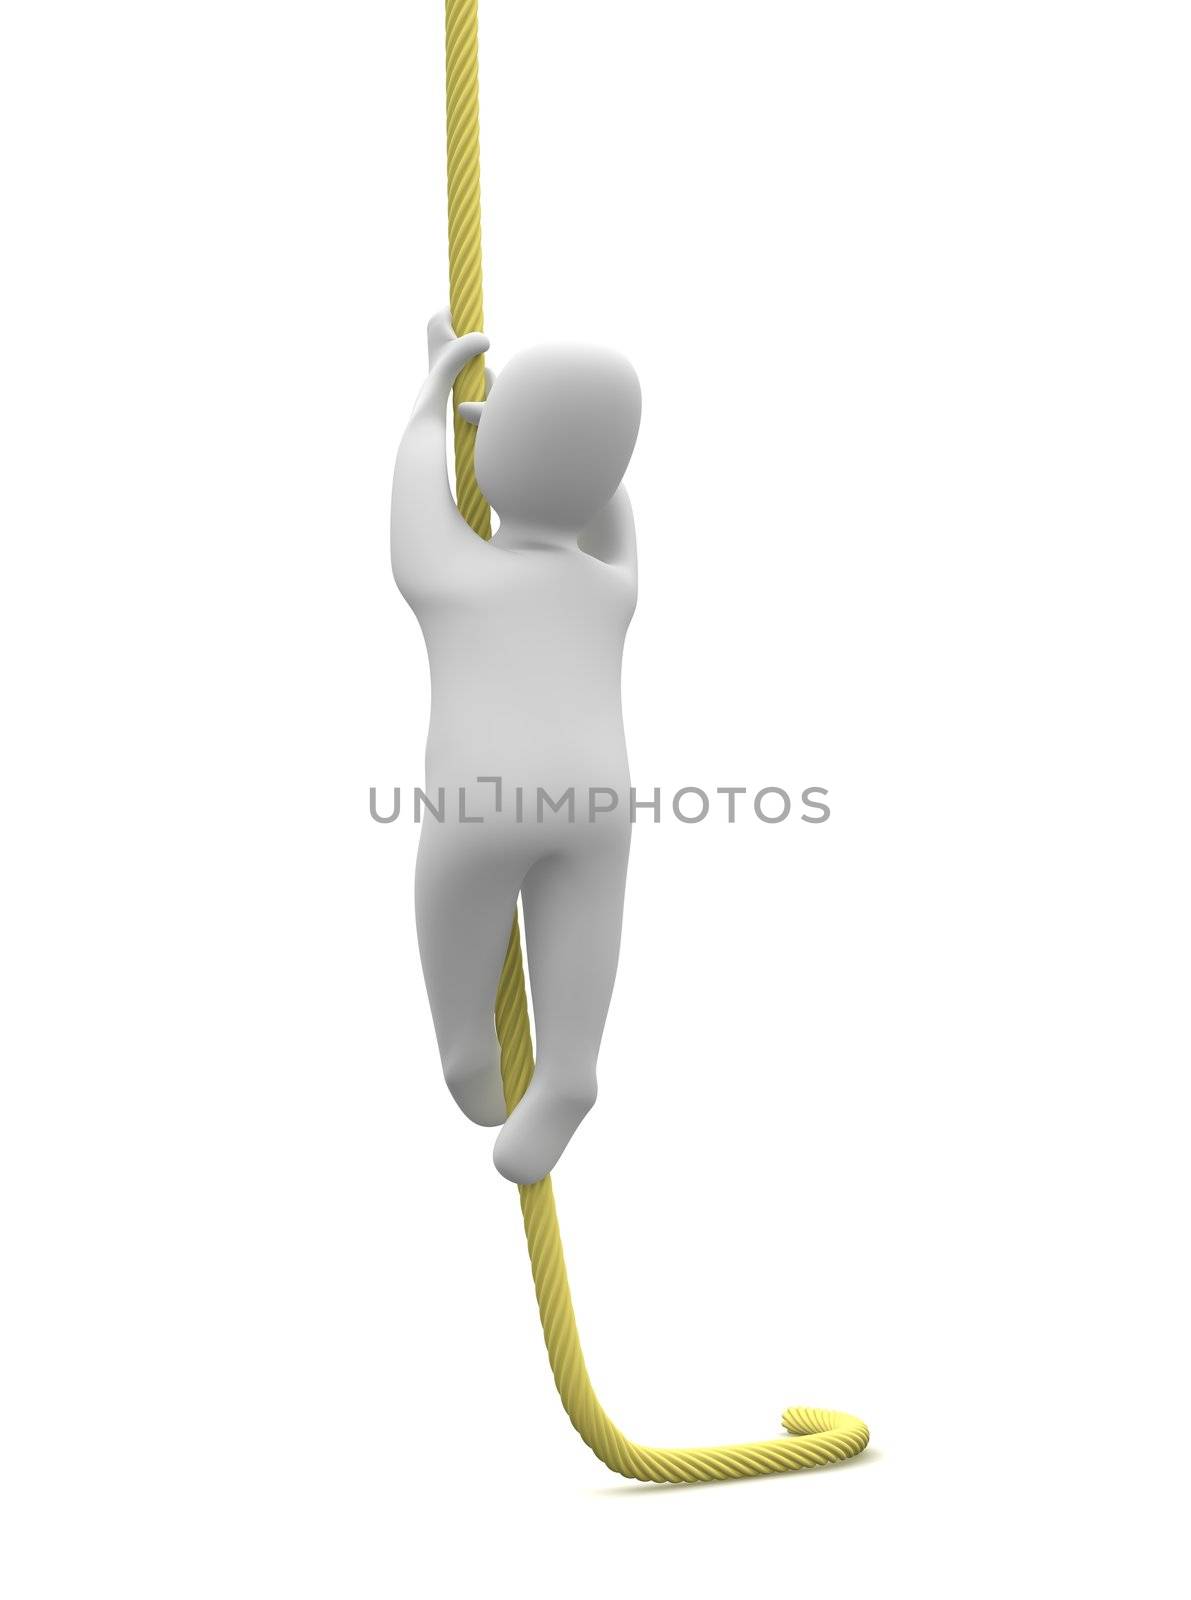 Climbing man. 3d rendered illustration isolated on white.